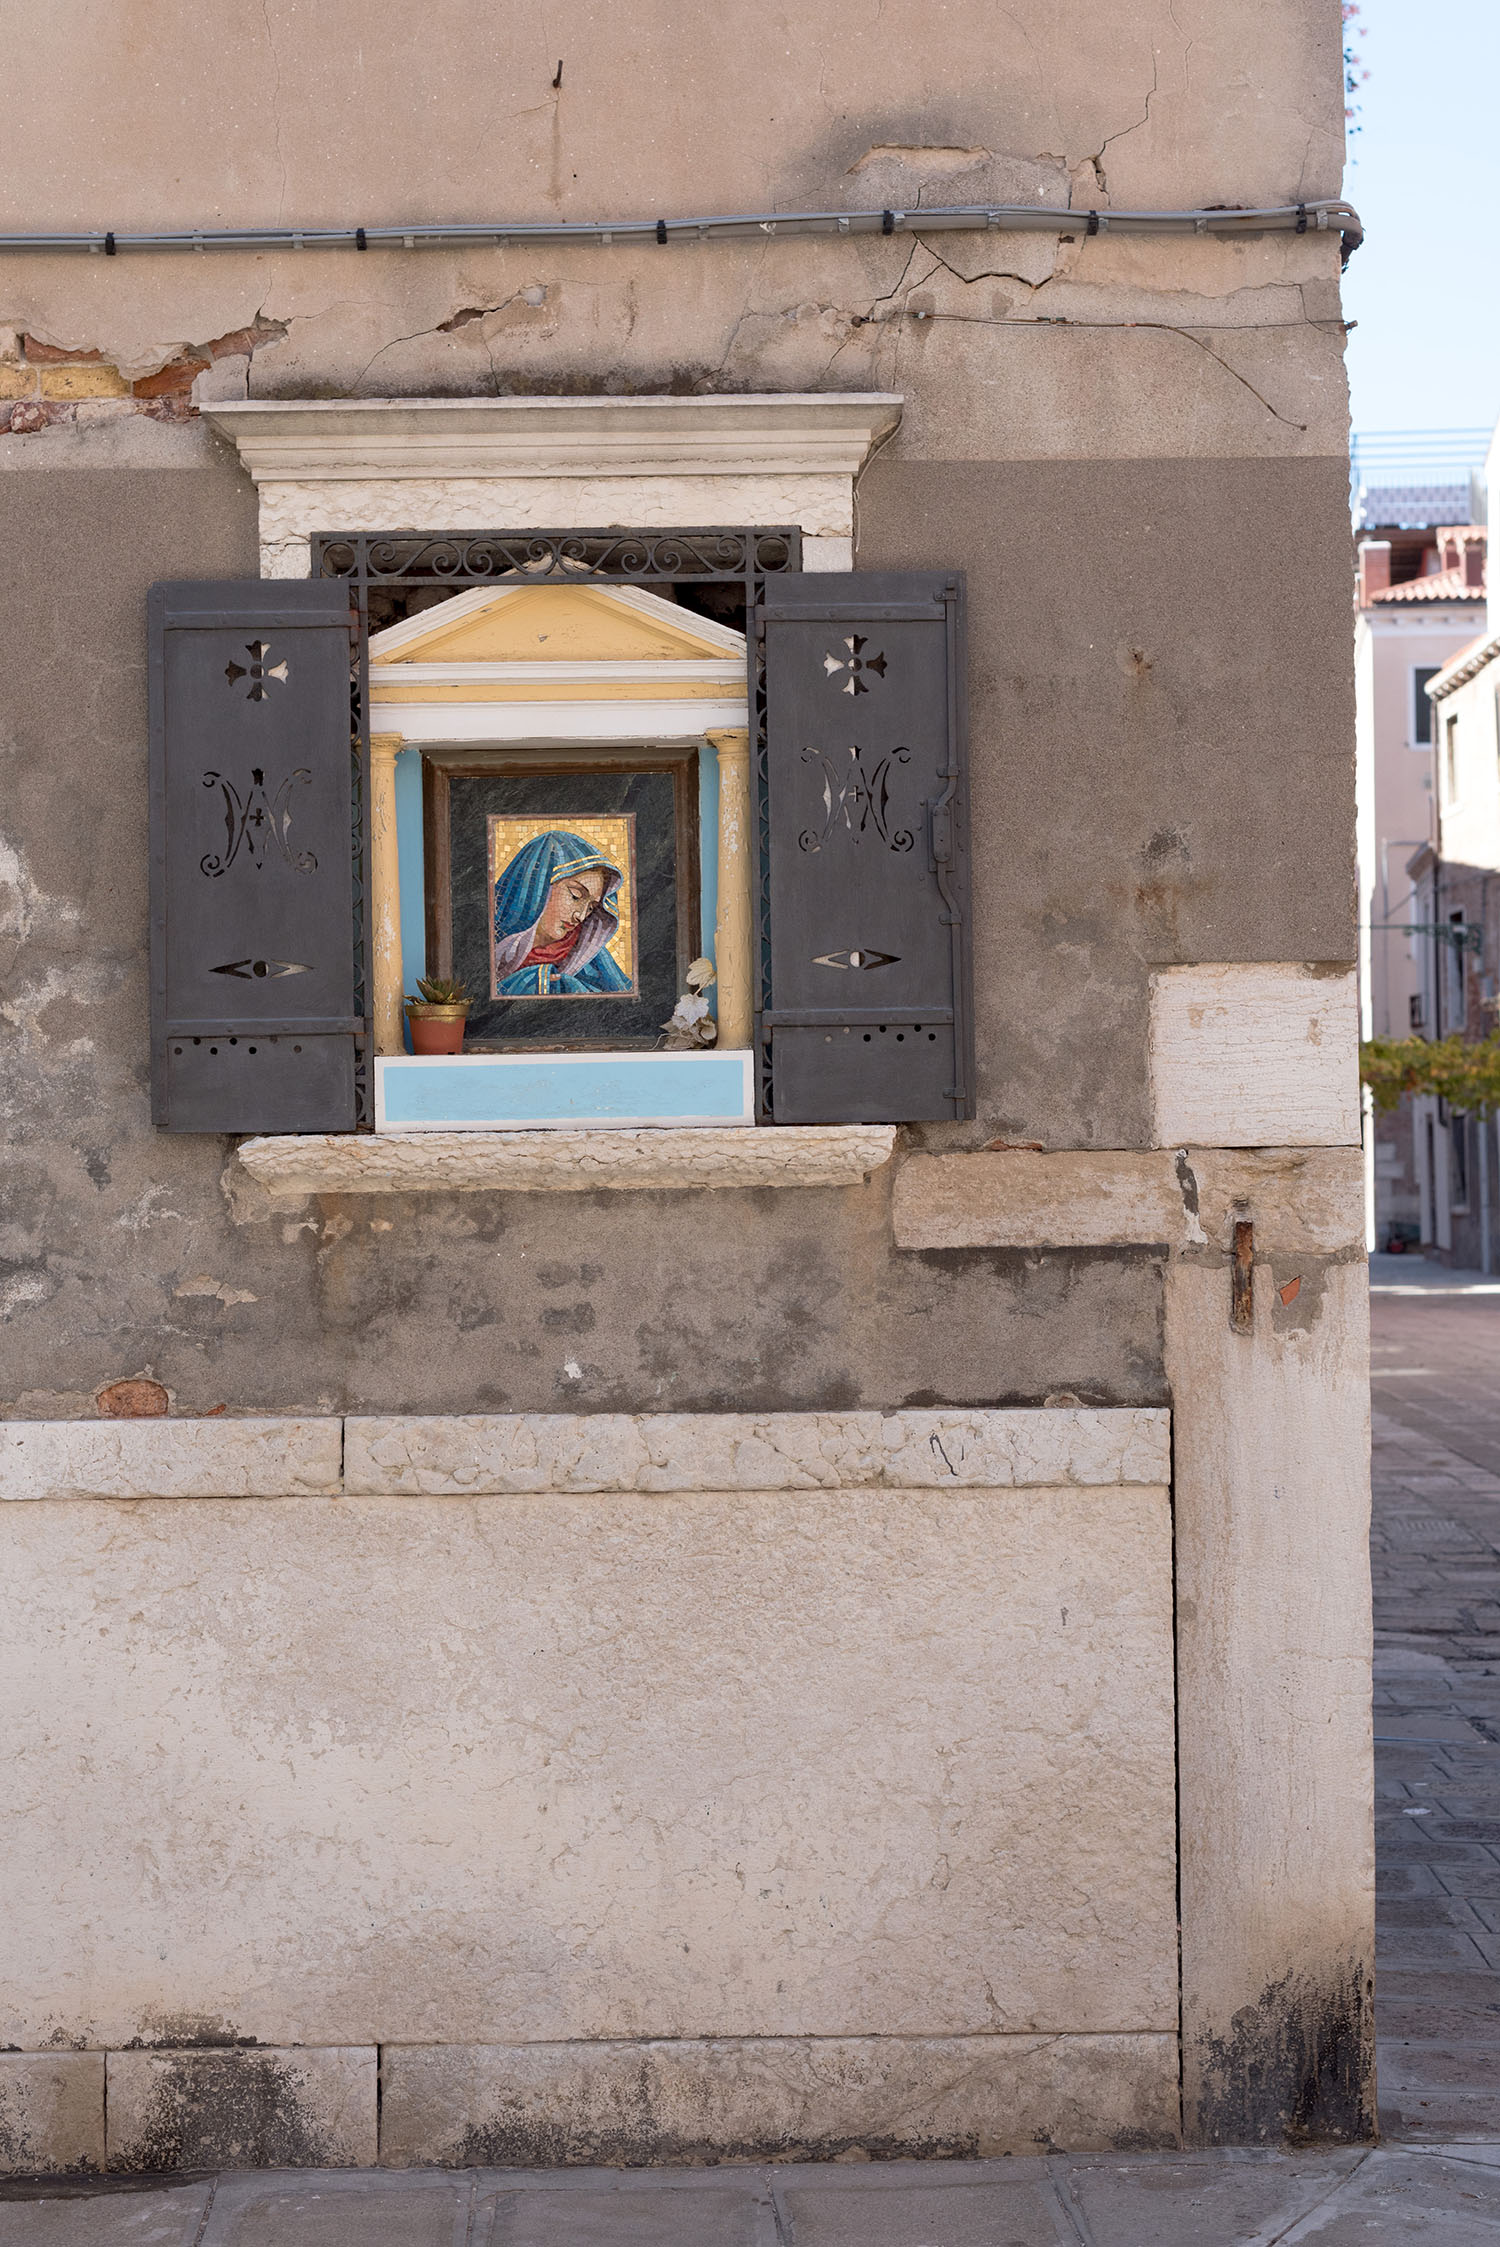 A roadside icon of the Virgin Mary in Venice, Italy, as photographed by top Winnipeg travel blogger Cee Fardoe of Coco & Vera